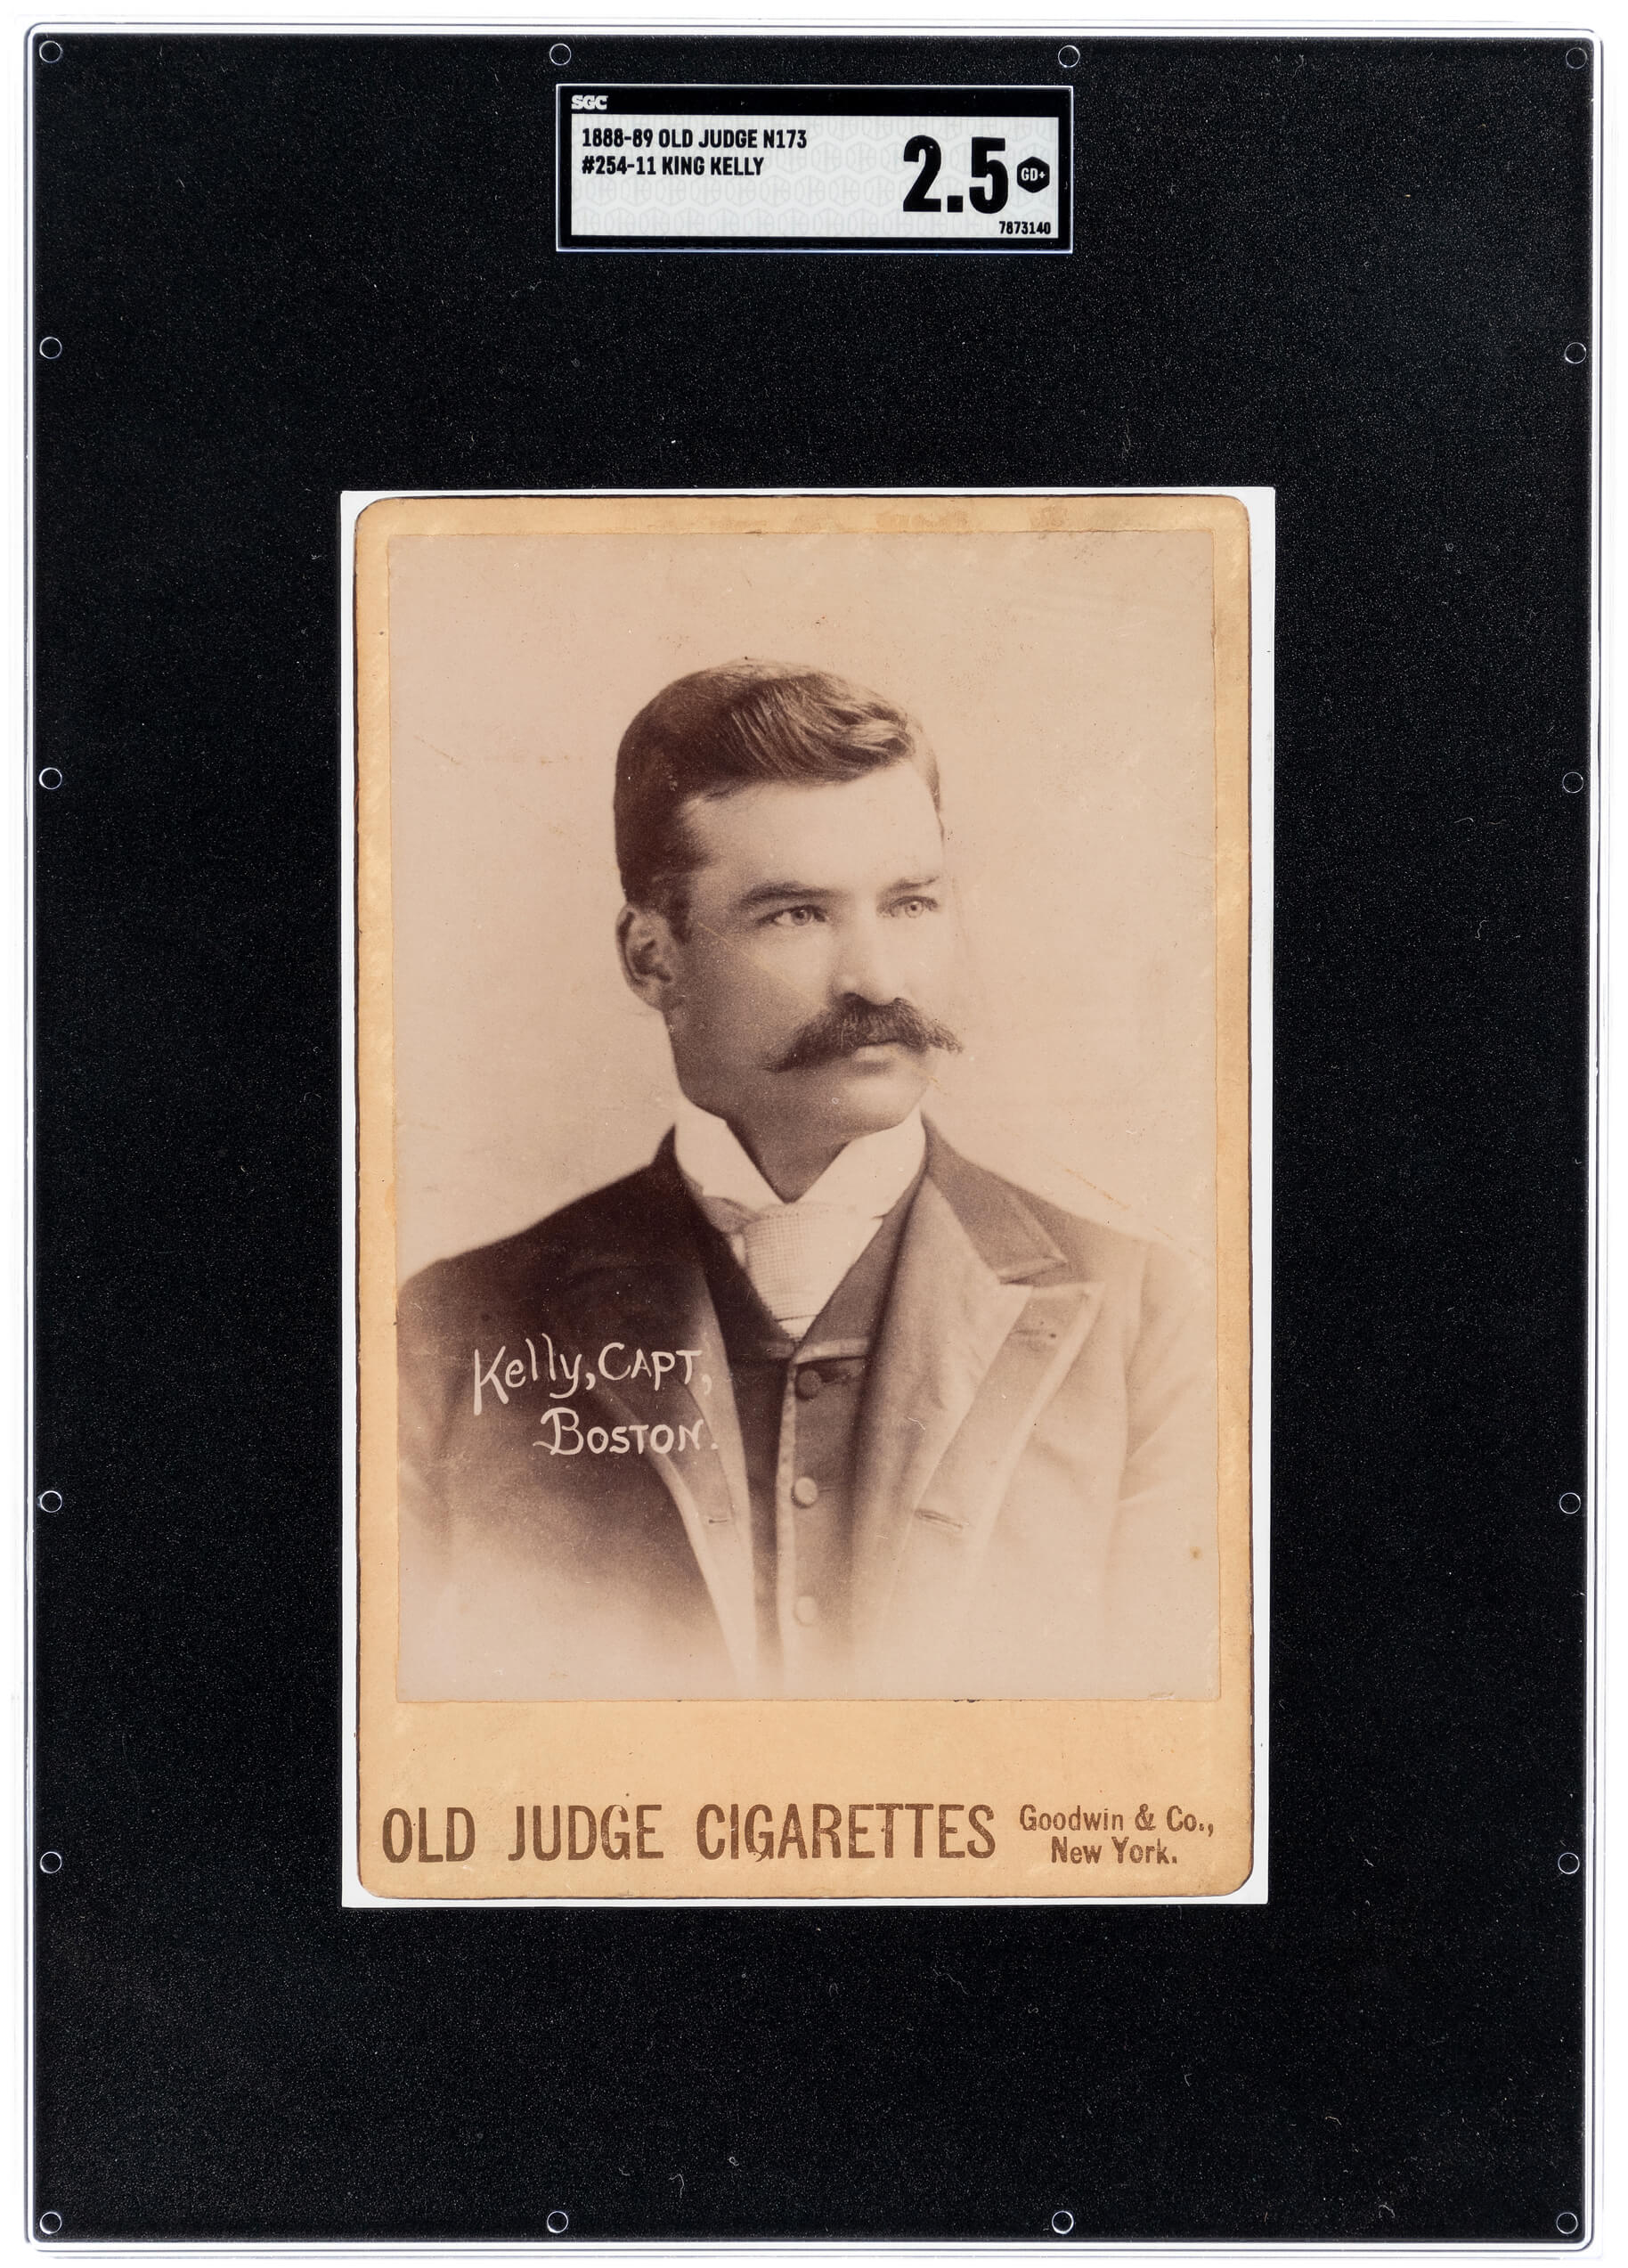 1888-89 N173 Old Judge (Cigarettes) mail-in premium cabinet card depicting baseball Hall of Famer Mike ‘King’ Kelly, Captain of the Boston Beaneaters, street-clothes version, size: 4.25in by 6.5in. One of only five known examples and only the third to appear at auction. SGC-graded 2.5 Good+. Est. $75,000-$100,000. Image courtesy of Hake’s Auctions